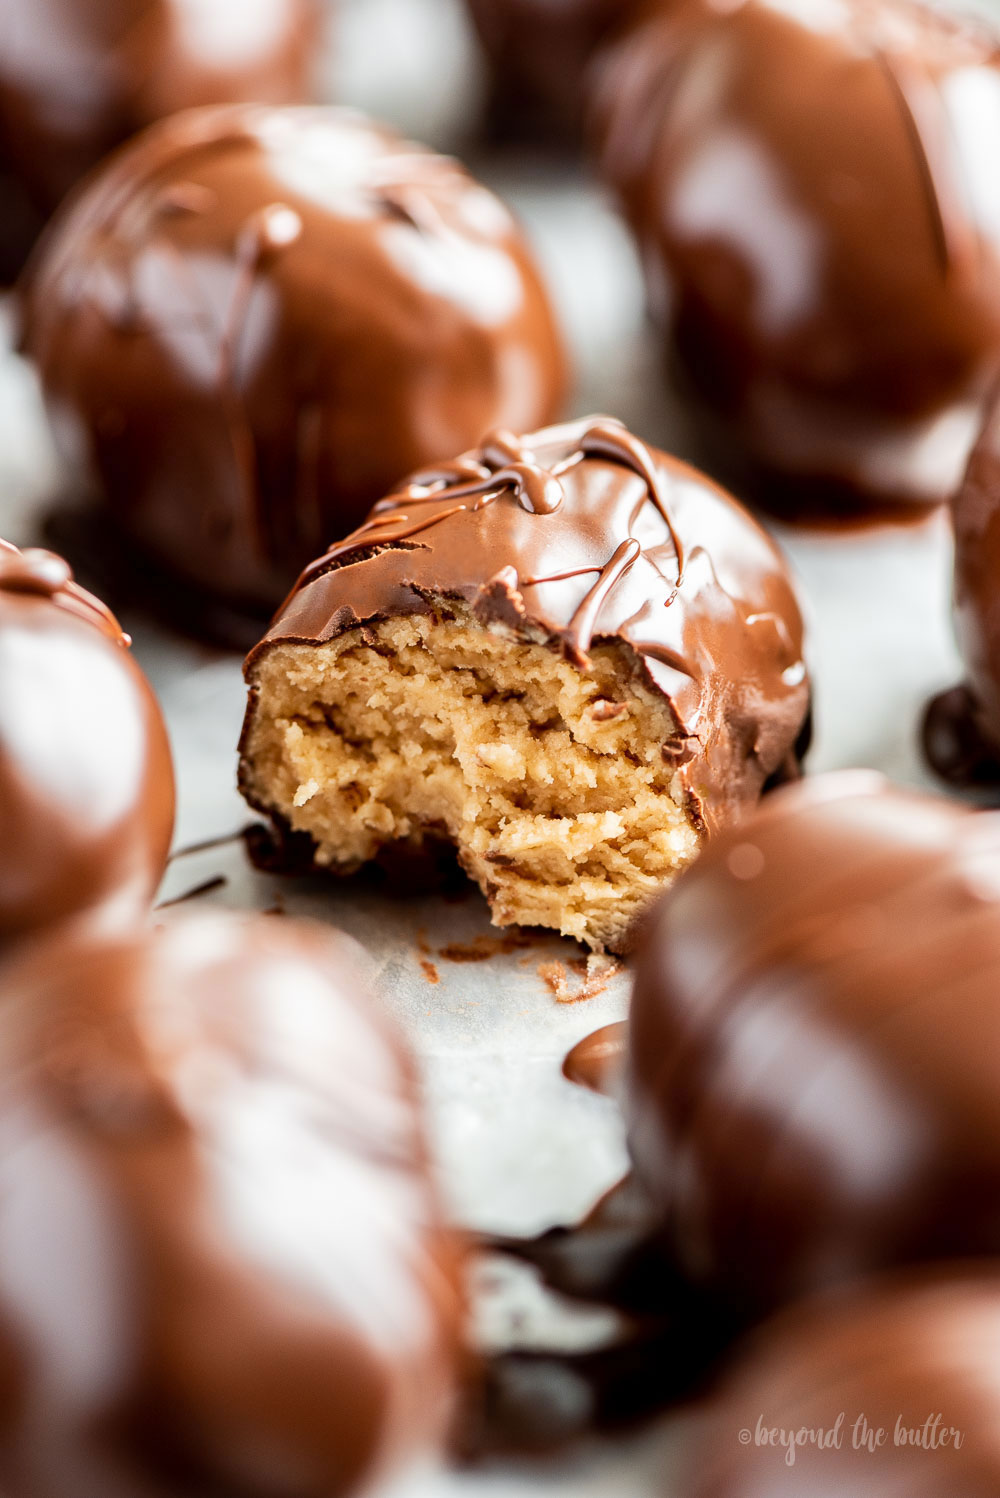 Close up photo of half eaten chocolate covered peanut butter egg | Image and Copyright Policy: © Beyond the Butter, LLC